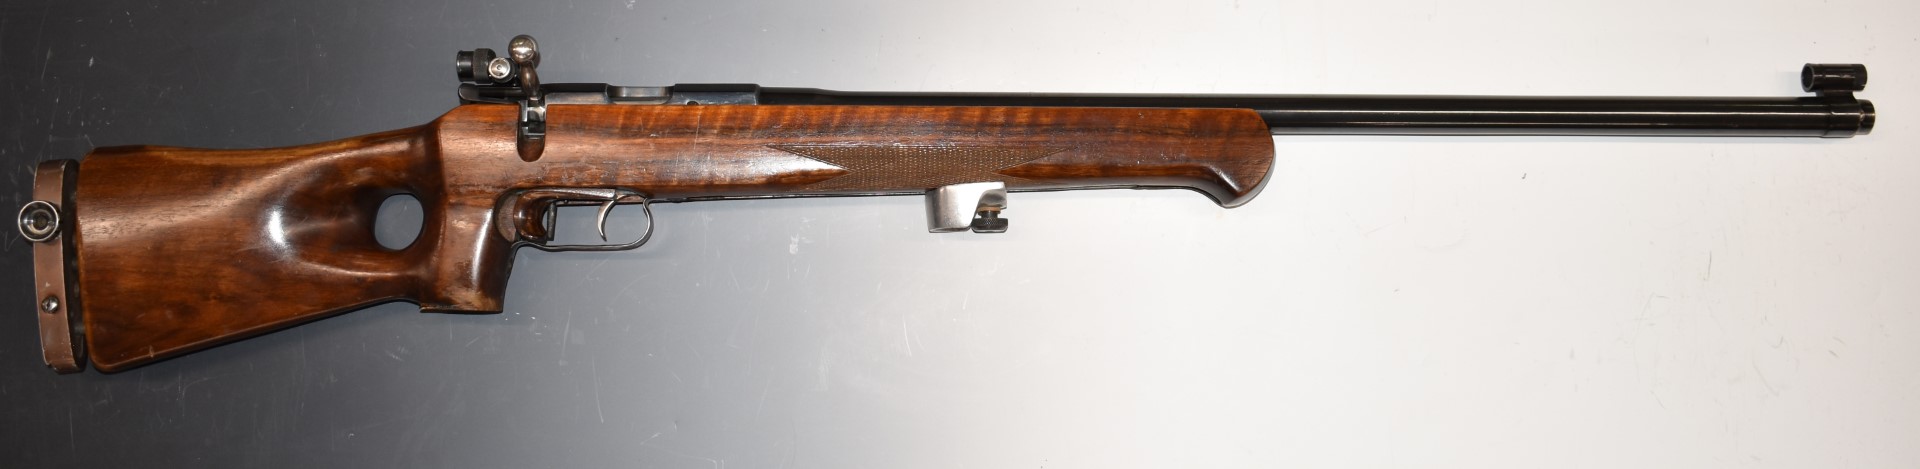 Vostok MU-12 .22 bolt-action target rifle with thumb hole grip, chequered forend, raised cheek - Image 2 of 15